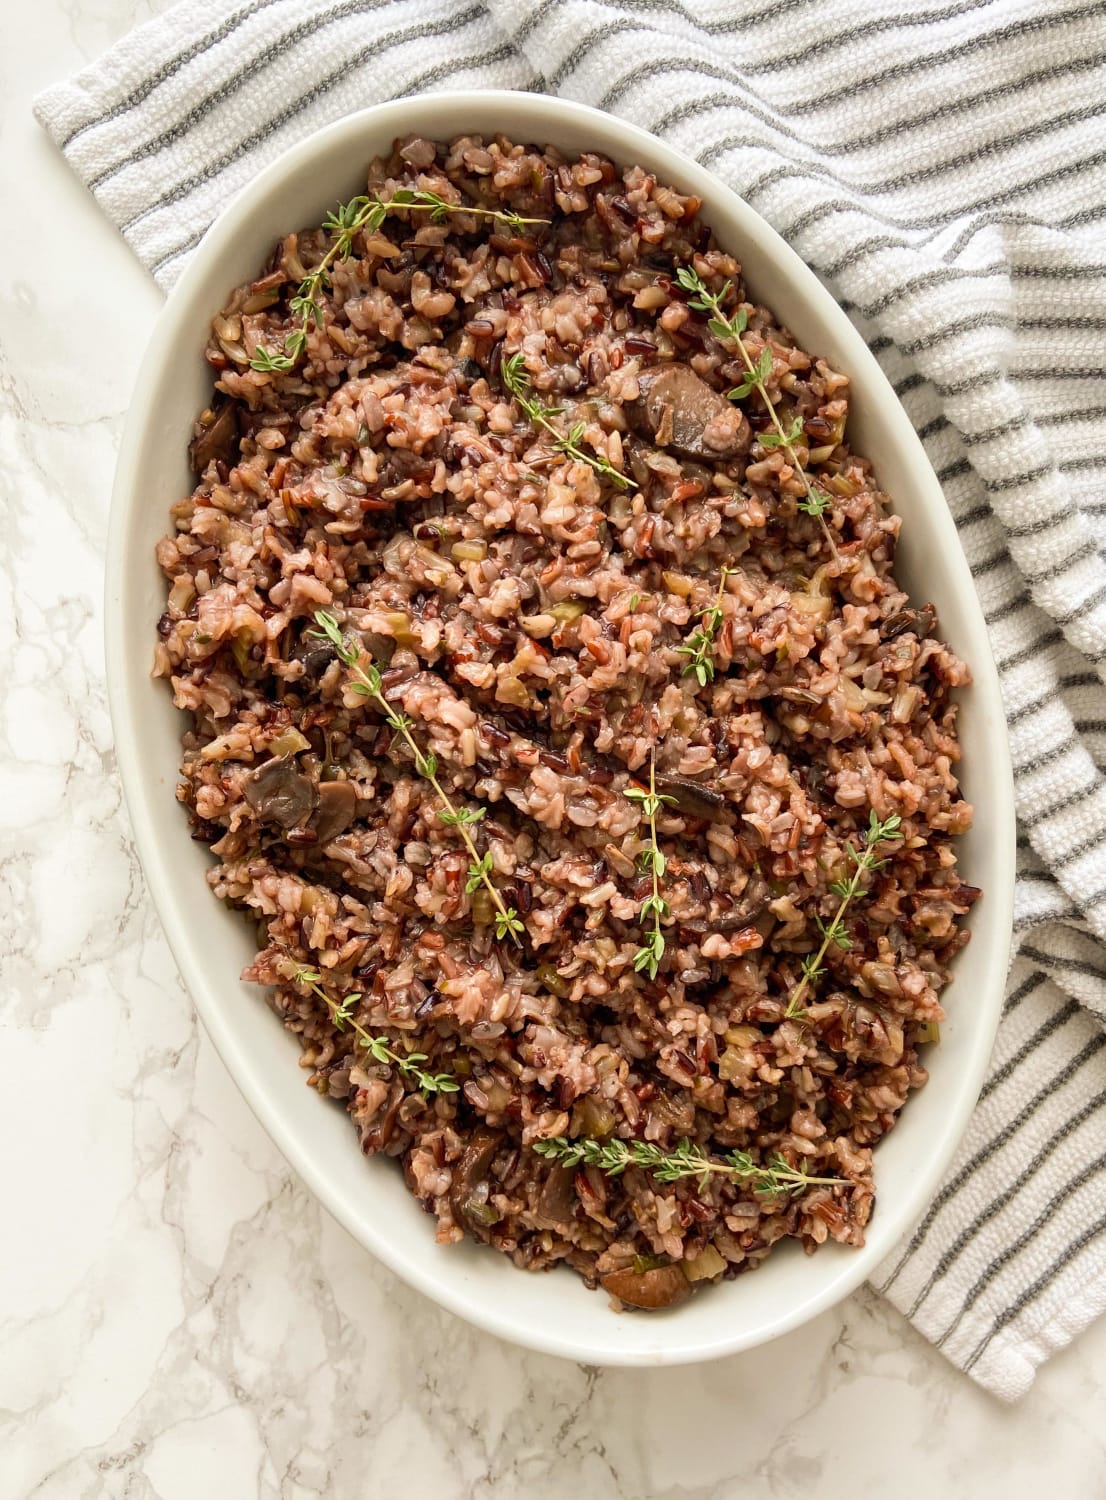 Wild Rice and Mushroom Stuffing to make for Thanksgiving!